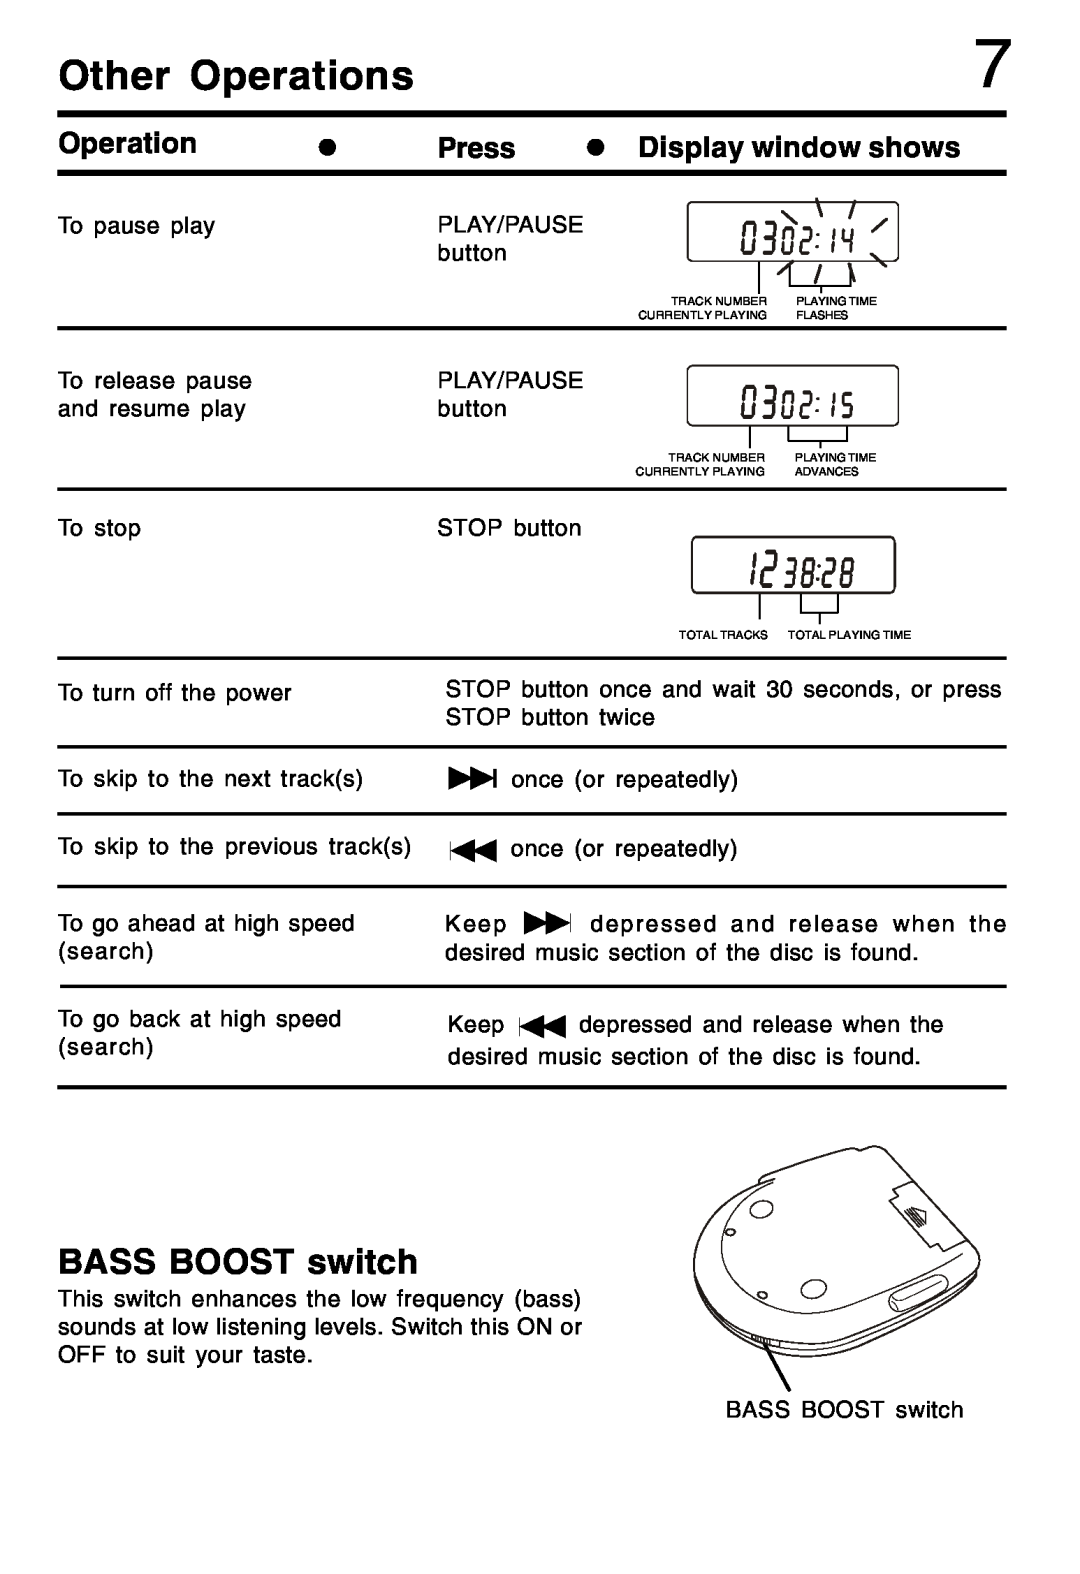 Lenoxx Electronics CD-79 operating instructions Other Operations, BASS BOOST switch 